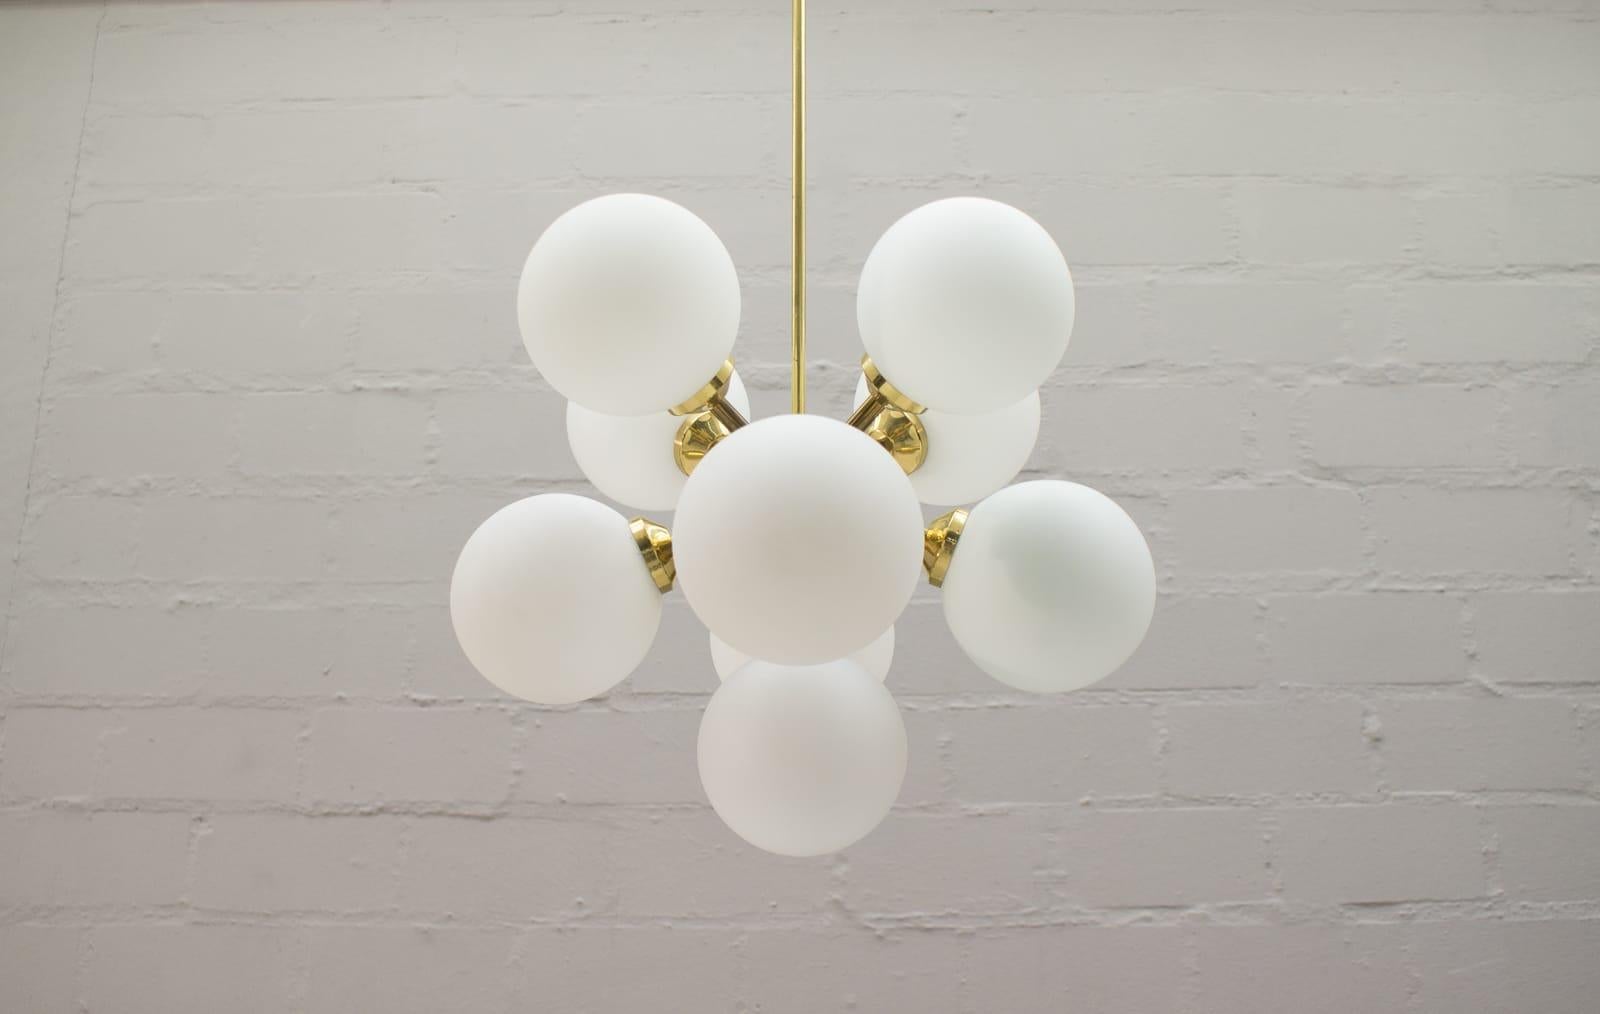 This vintage ceiling lamp features twelve milk glass balls with E14 bulb sockets and a gilded frame.

Very elegant and decorative.